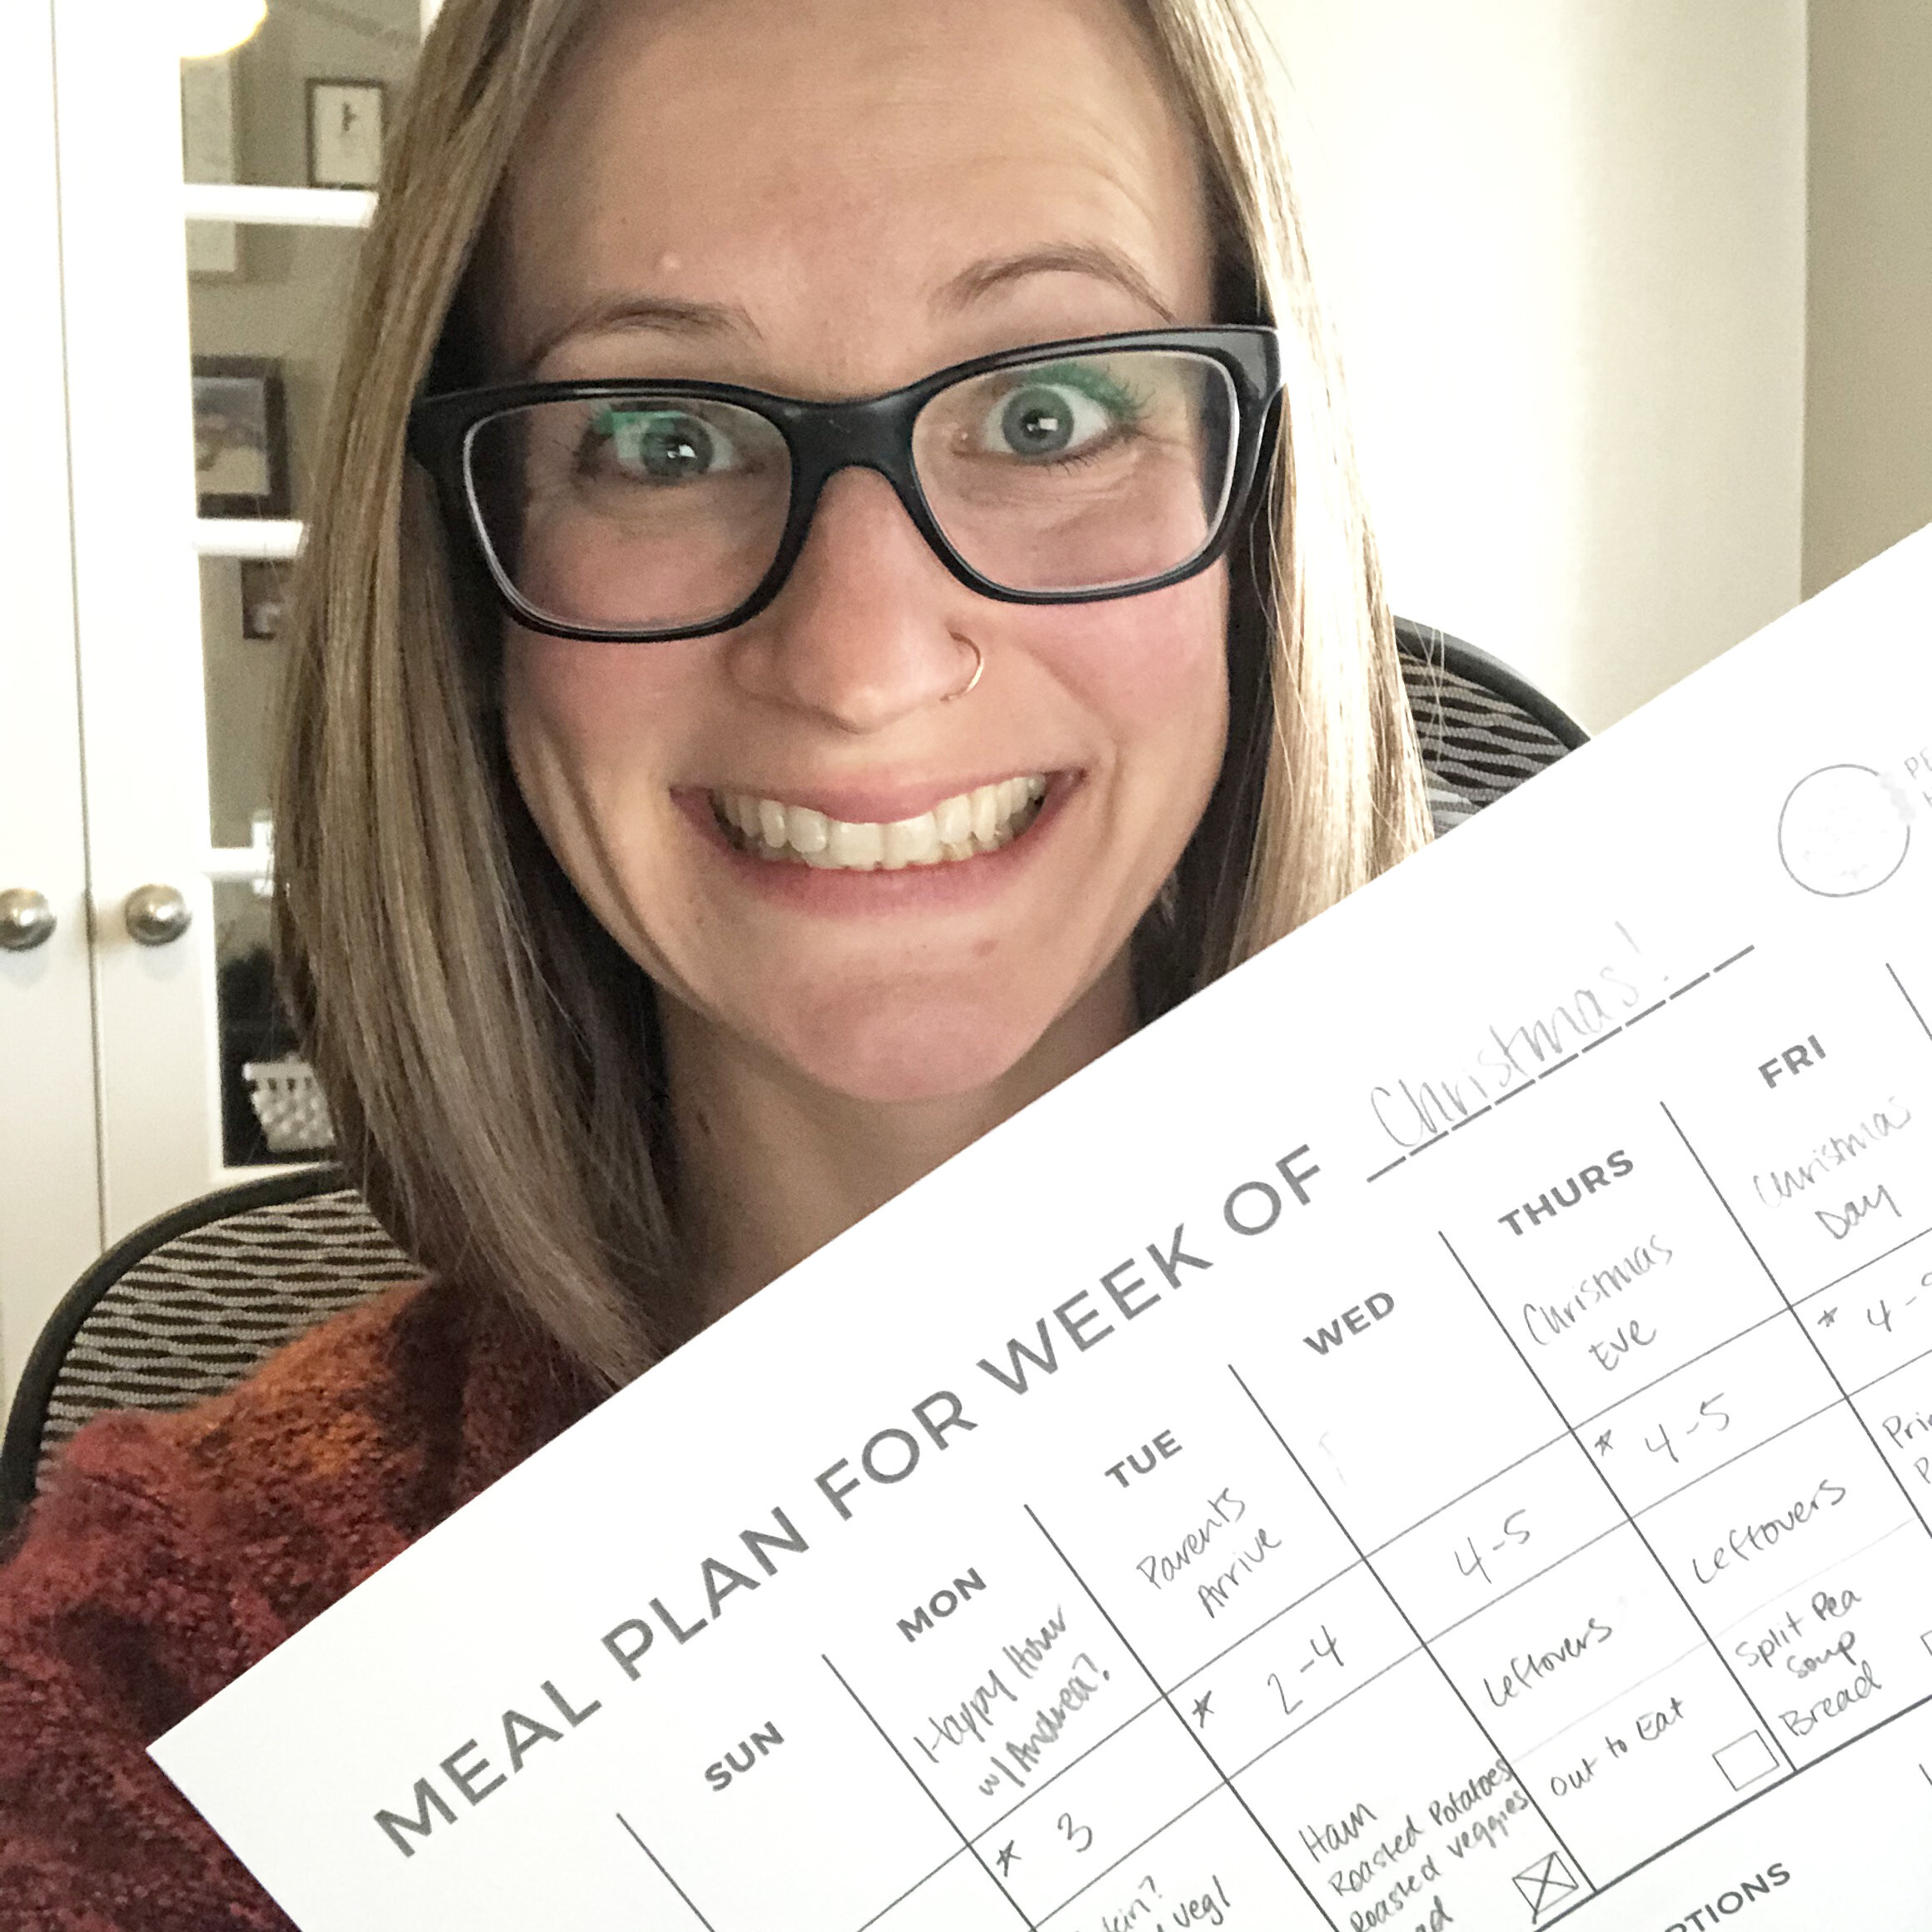 Grab my free Meal Planning Template to help you plan this week